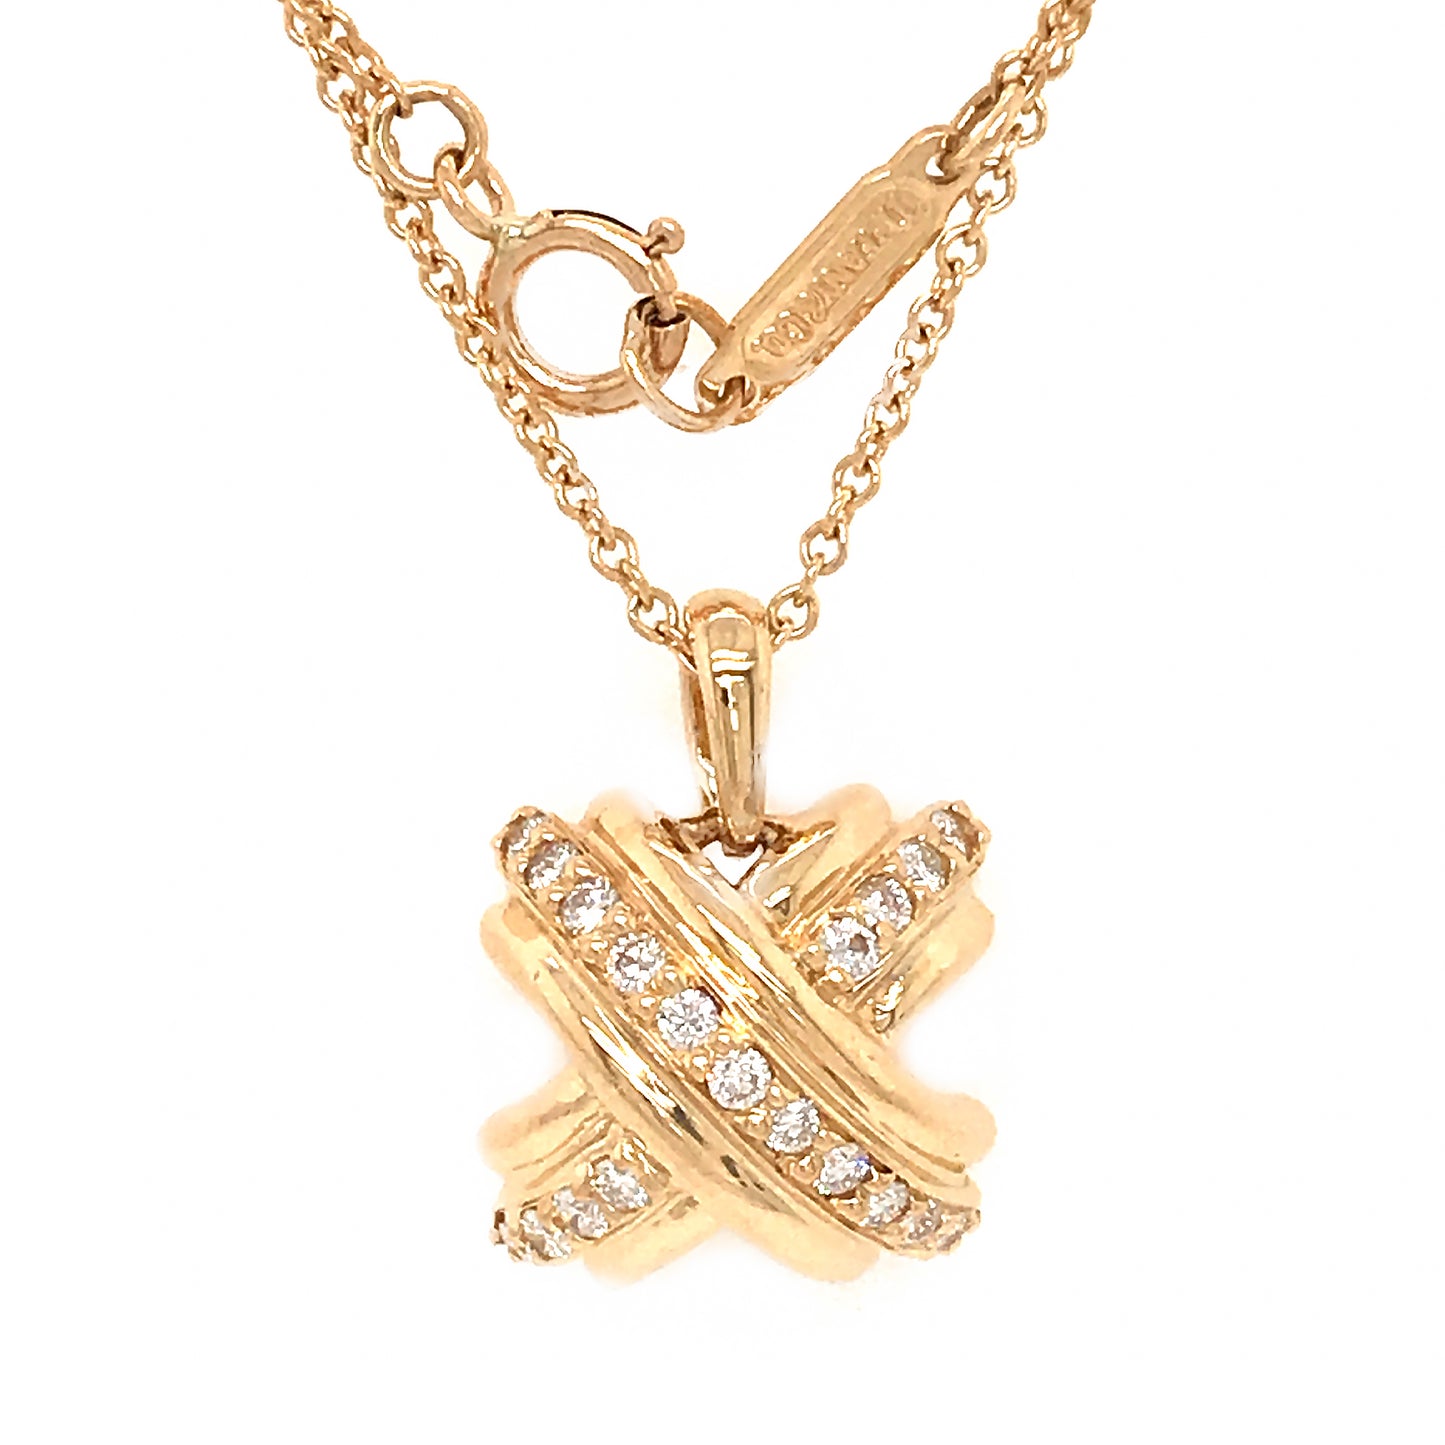 Buy Tiffany & Co. Kiss X Necklace 18k Yellow Gold Online in India - Etsy